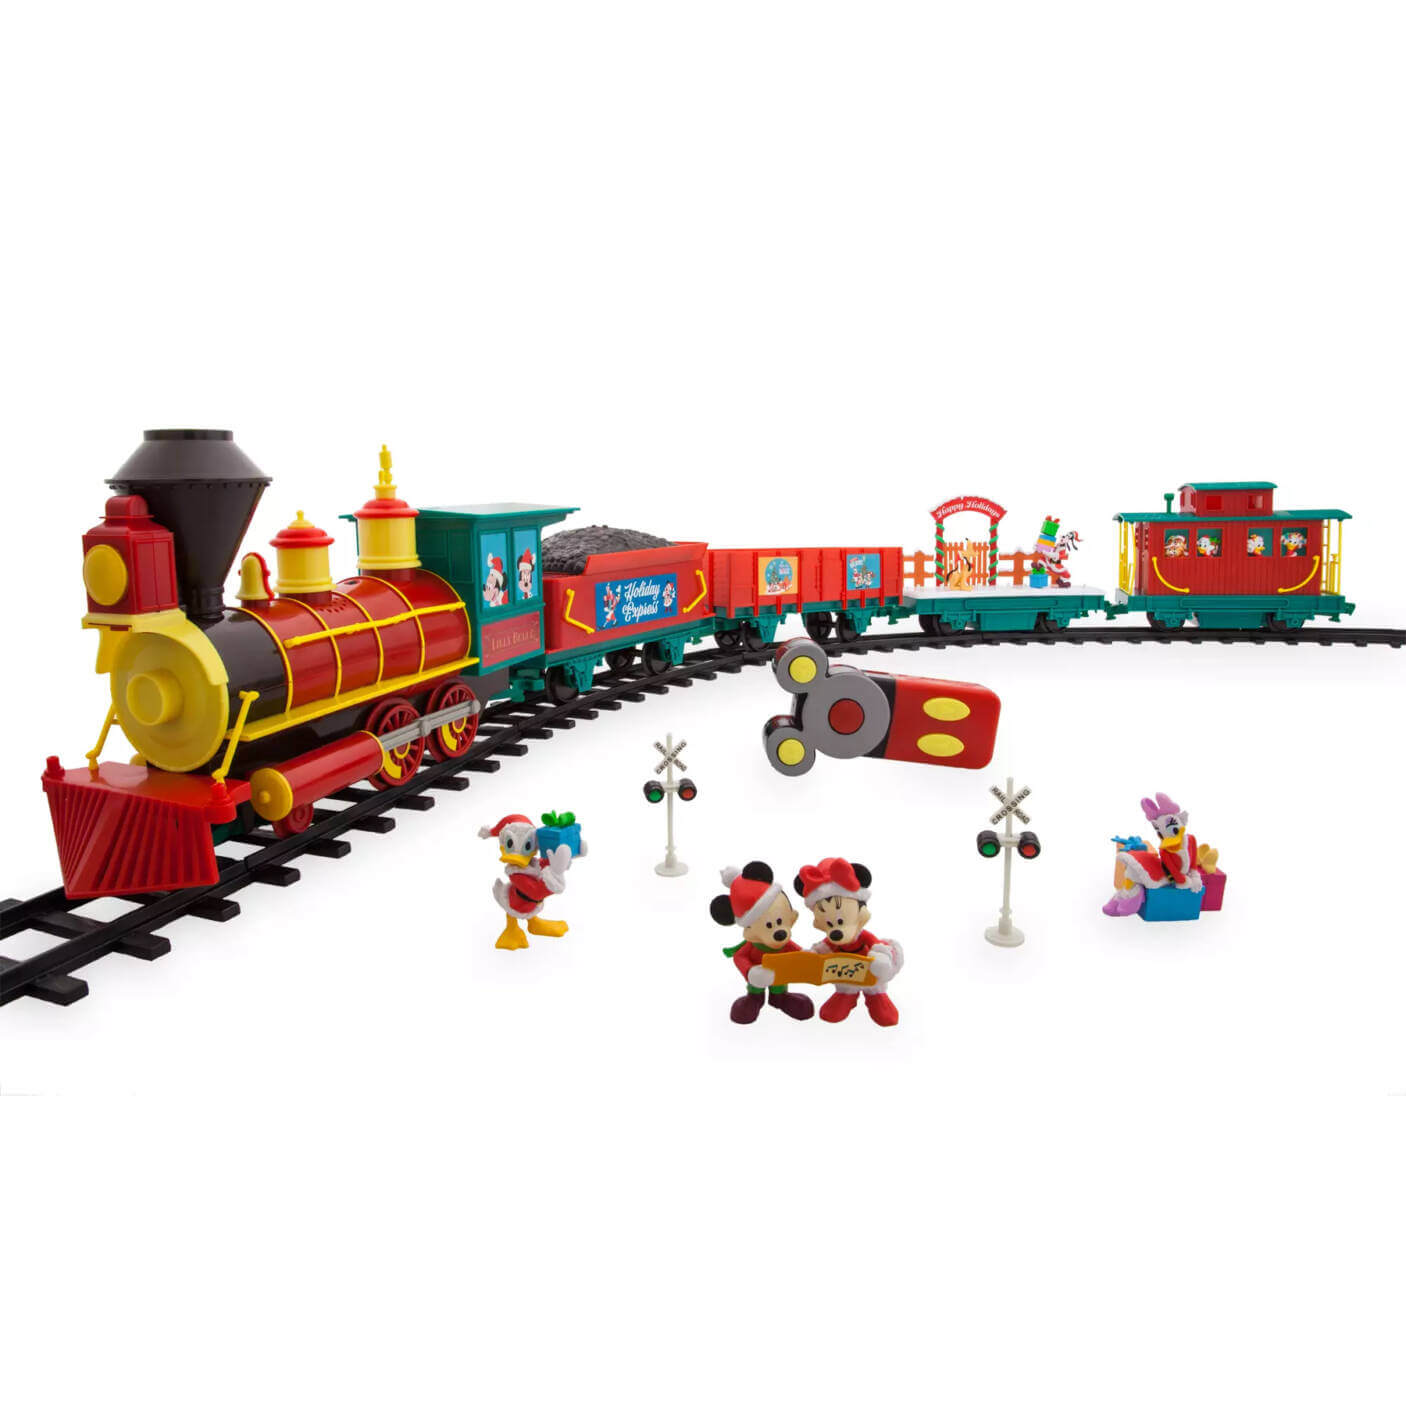 https://www.micechat.com/wp-content/uploads/2023/09/micechat-disney-holiday-gift-guide-2023-shopDisney-mickey-mouse-and-friends-disney-parks-holiday-train-set-2.jpg